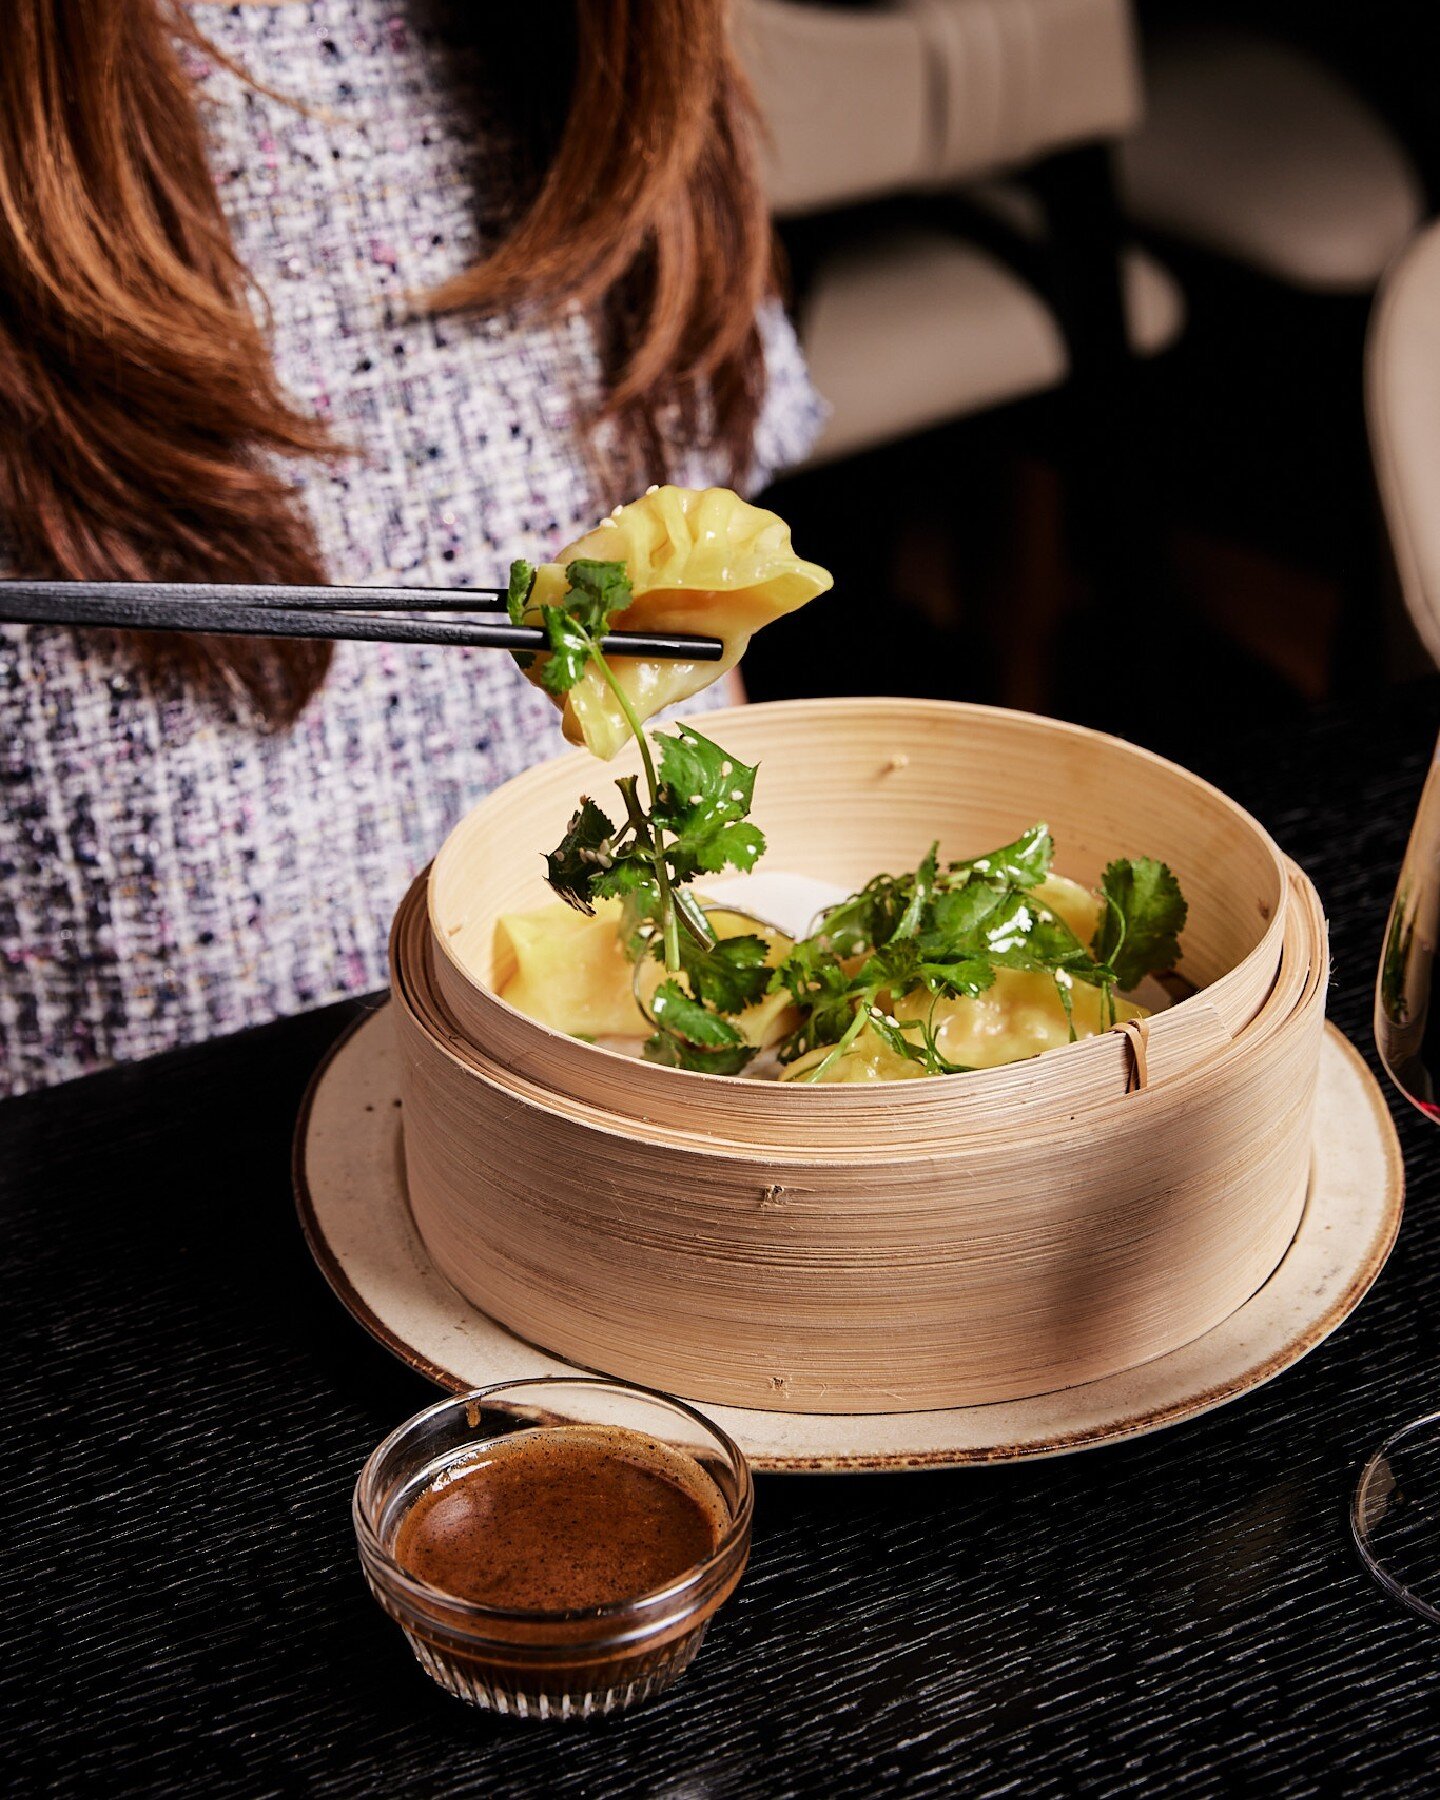 Uniting culture with flavour, @yugo_melbourne nails it every time. The chefs at Yugo take inspiration from across the globe, whilst sourcing the best local ingredients for an evening that is sure to delight your senses.

If you need a last minute loc